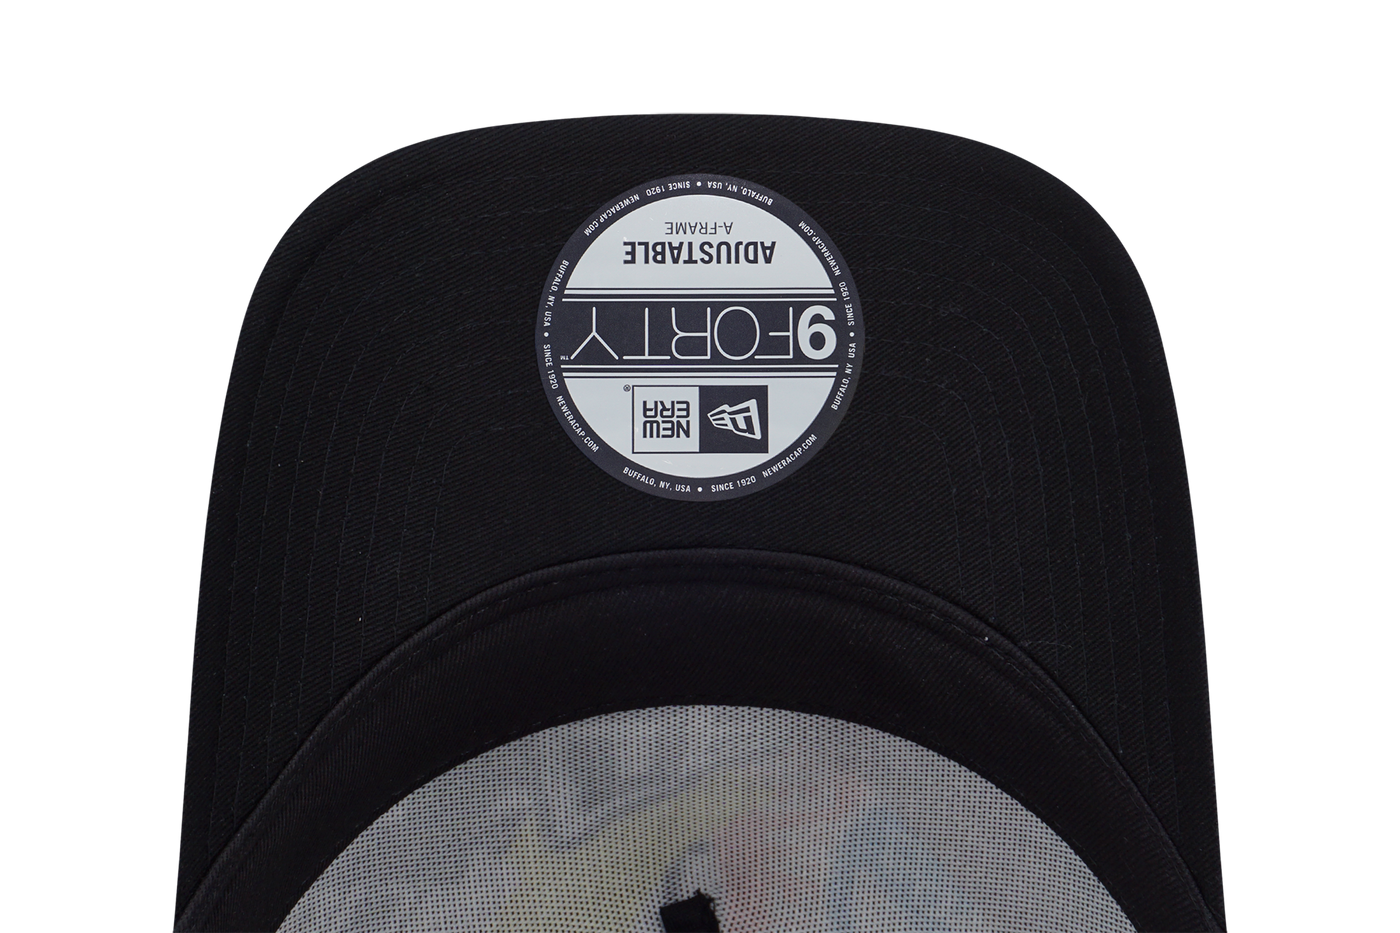 NEW ERA PARTY VIBE - STICKER BOMBING MULTI 9FORTY AF TRUCKER CAP